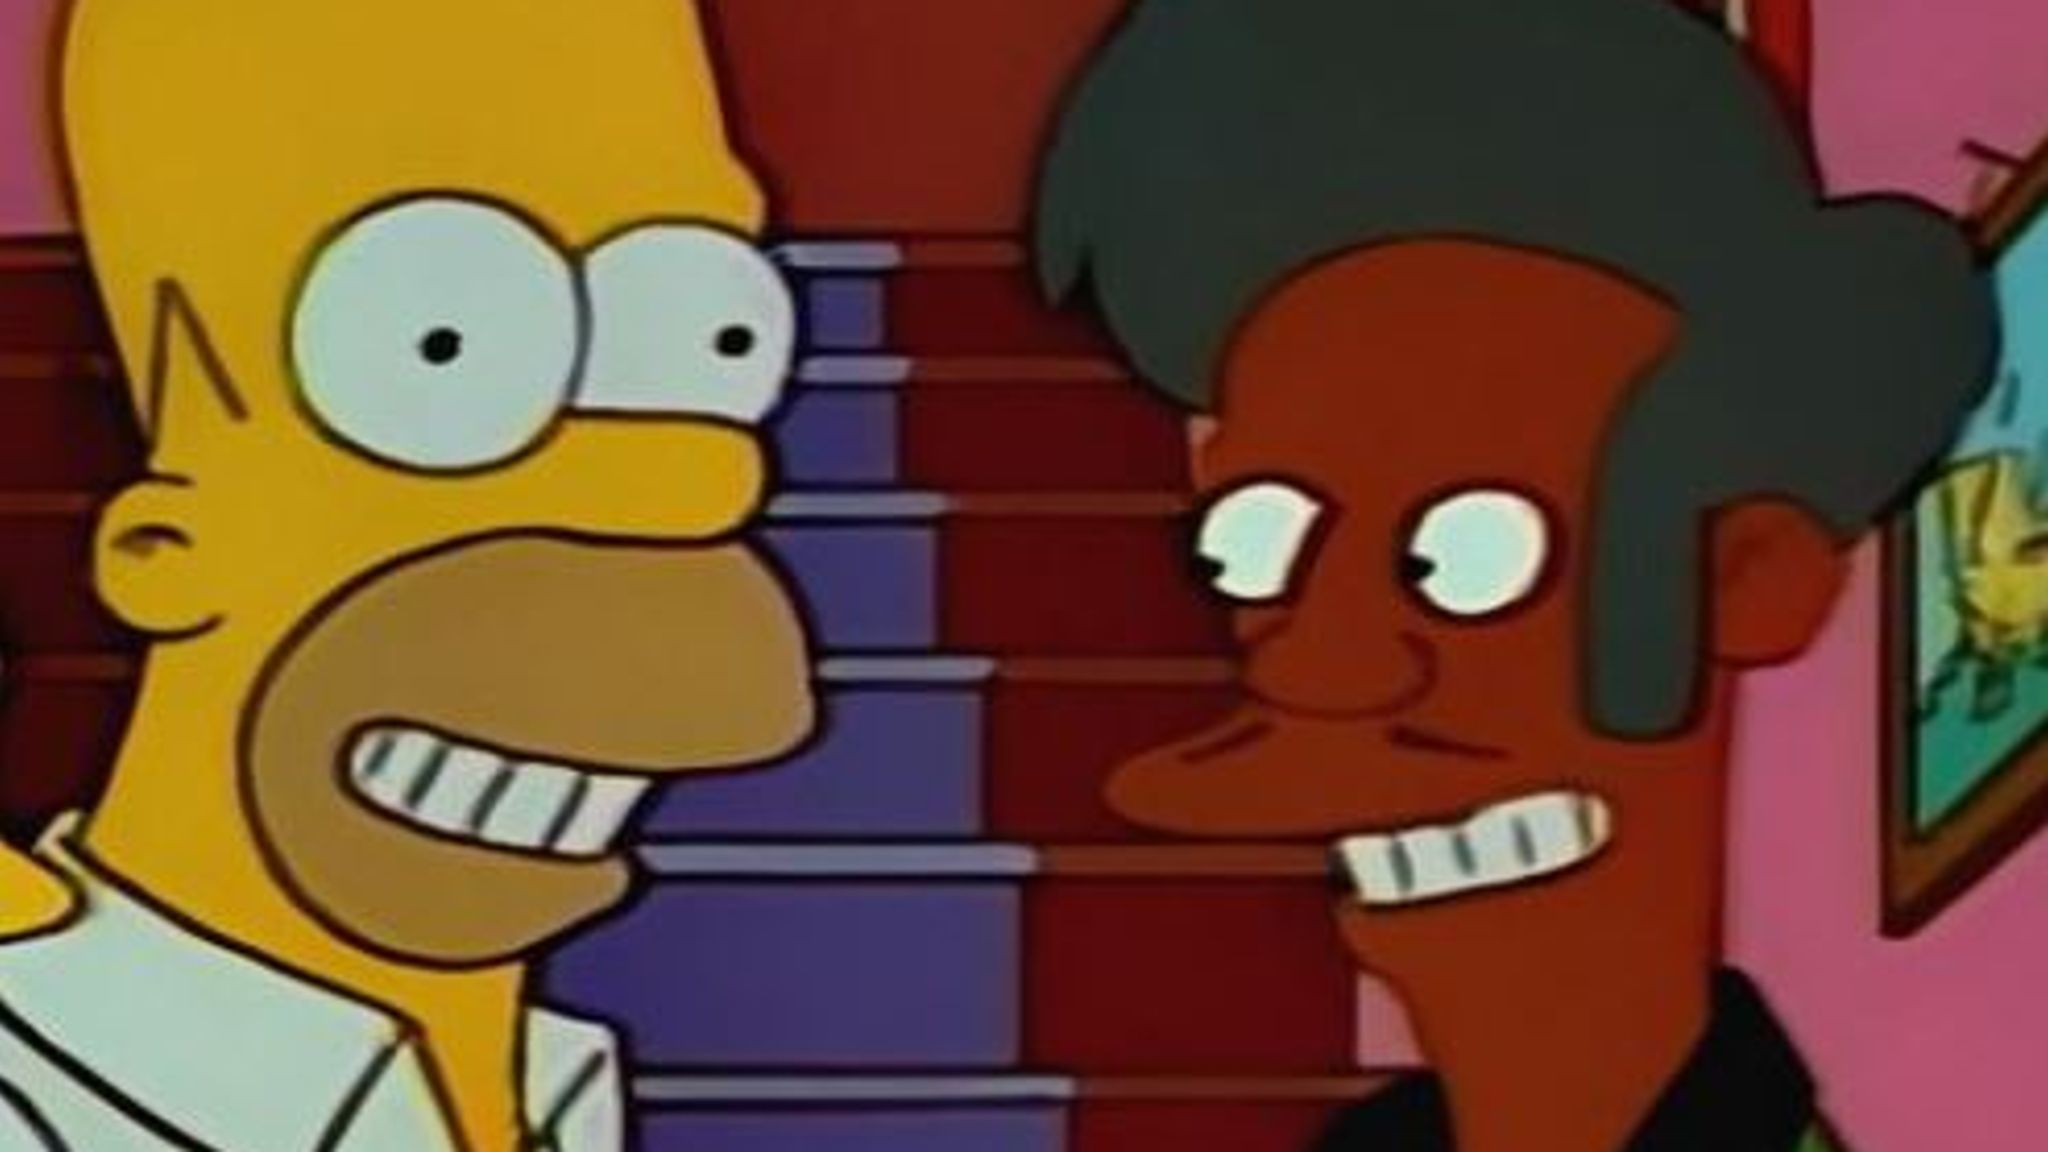 The Simpsons Show To Stop Using Whites For Voiceover Of Non-White Characters